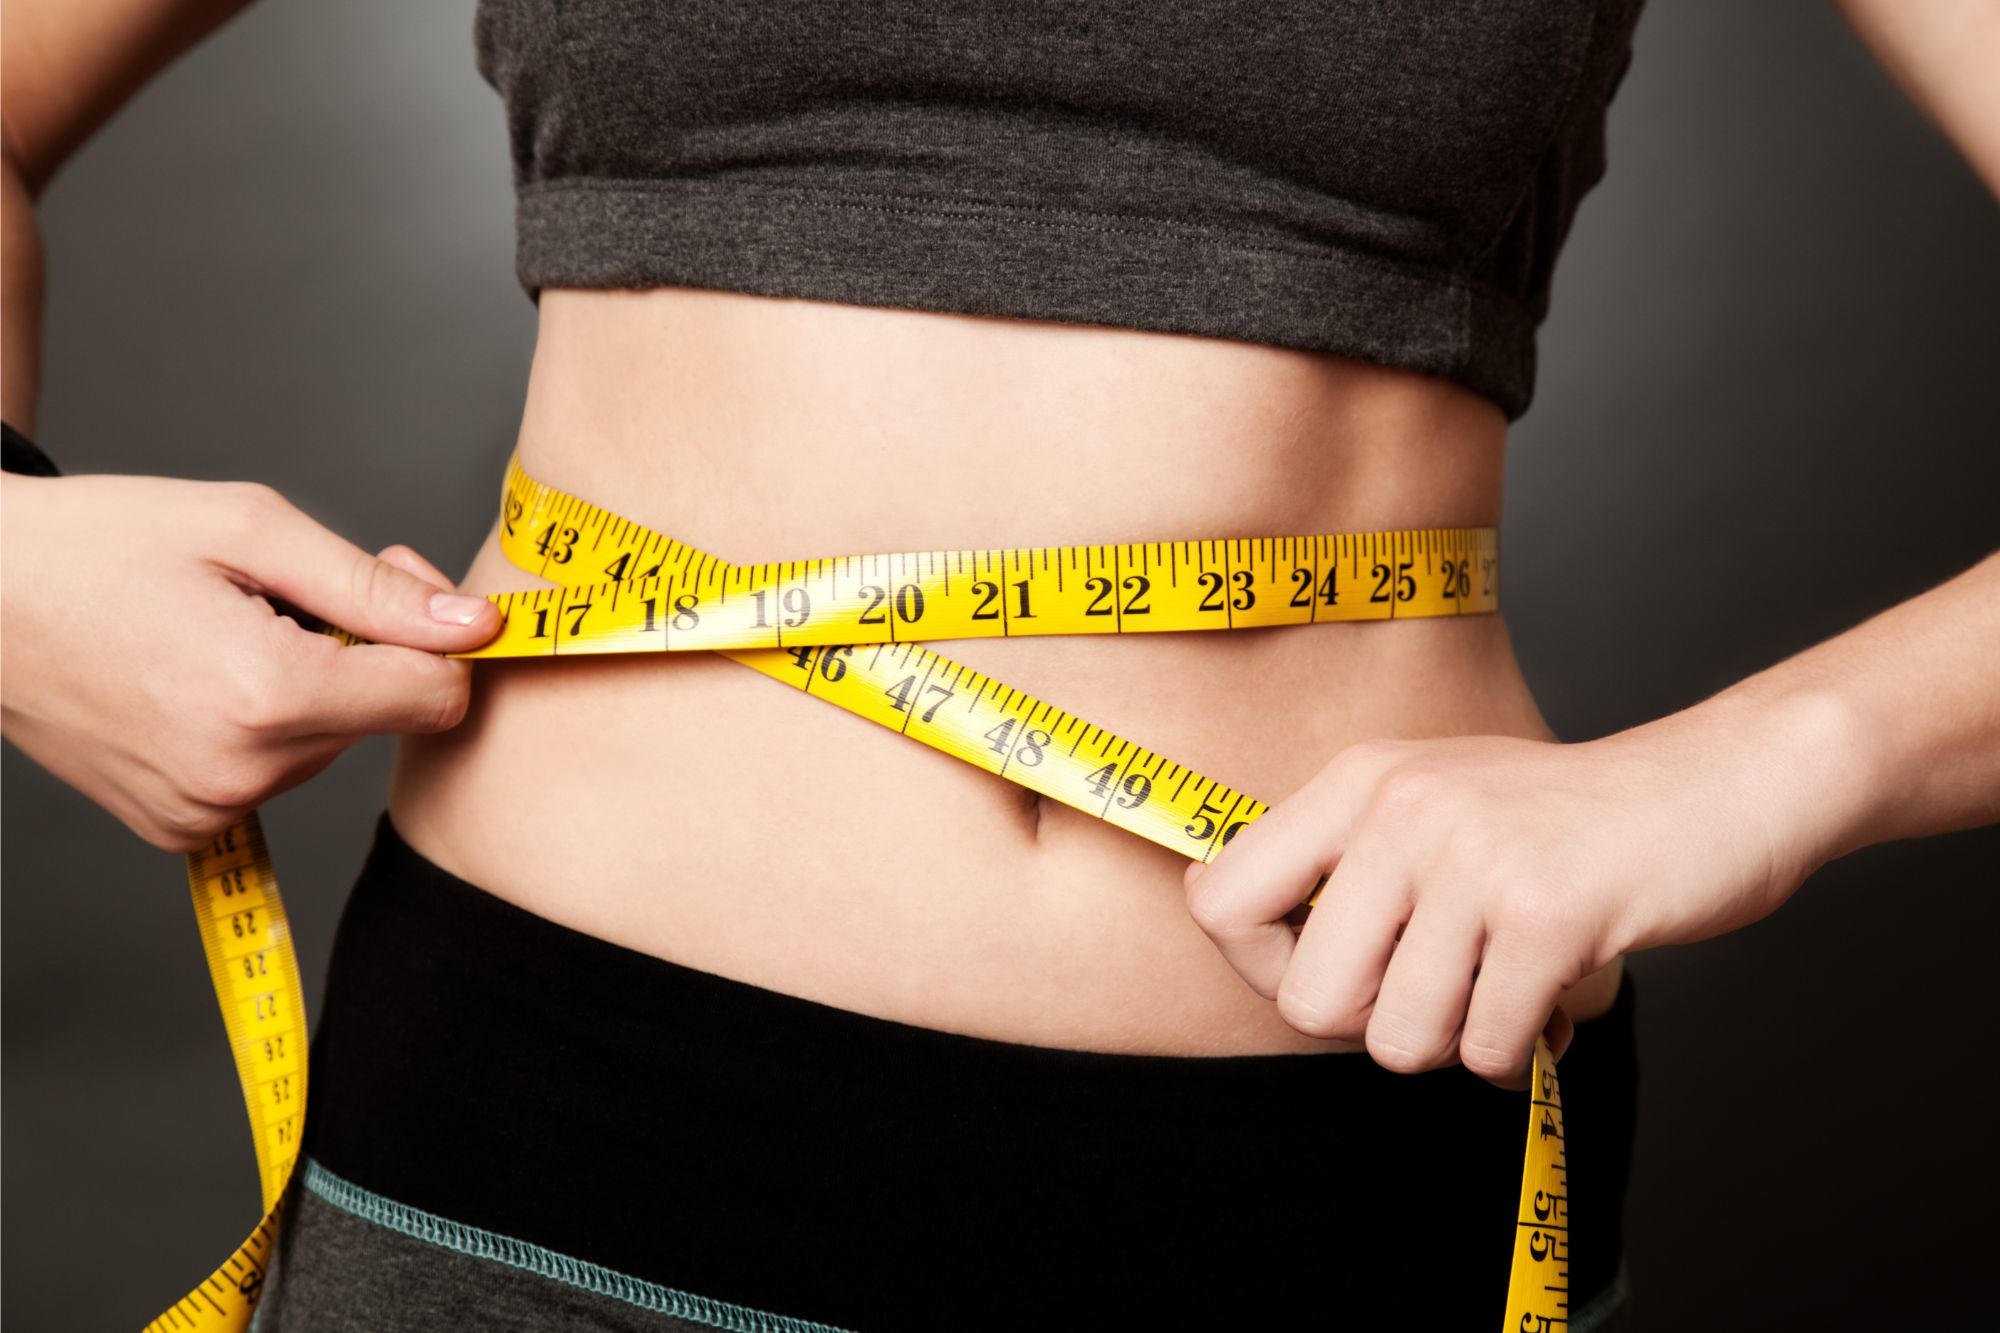 Weight Loss Clinic Indianapolis